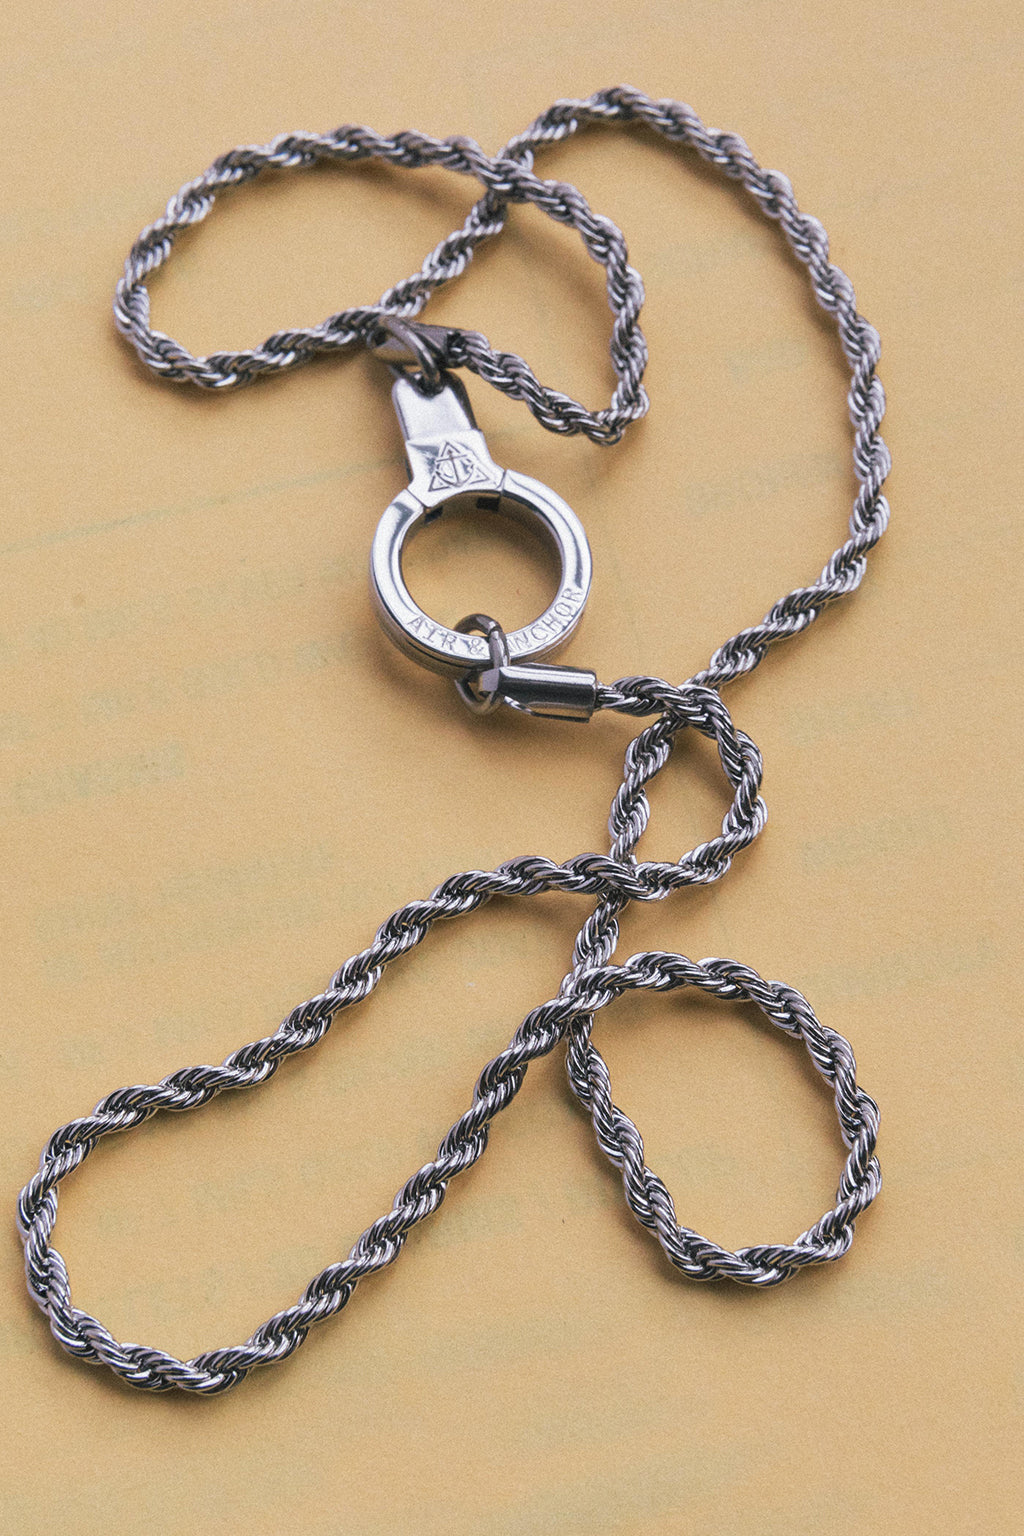 Stainless Steel Remain Grateful Rope Chain Necklace with Cuff Keeper – Air  & Anchor